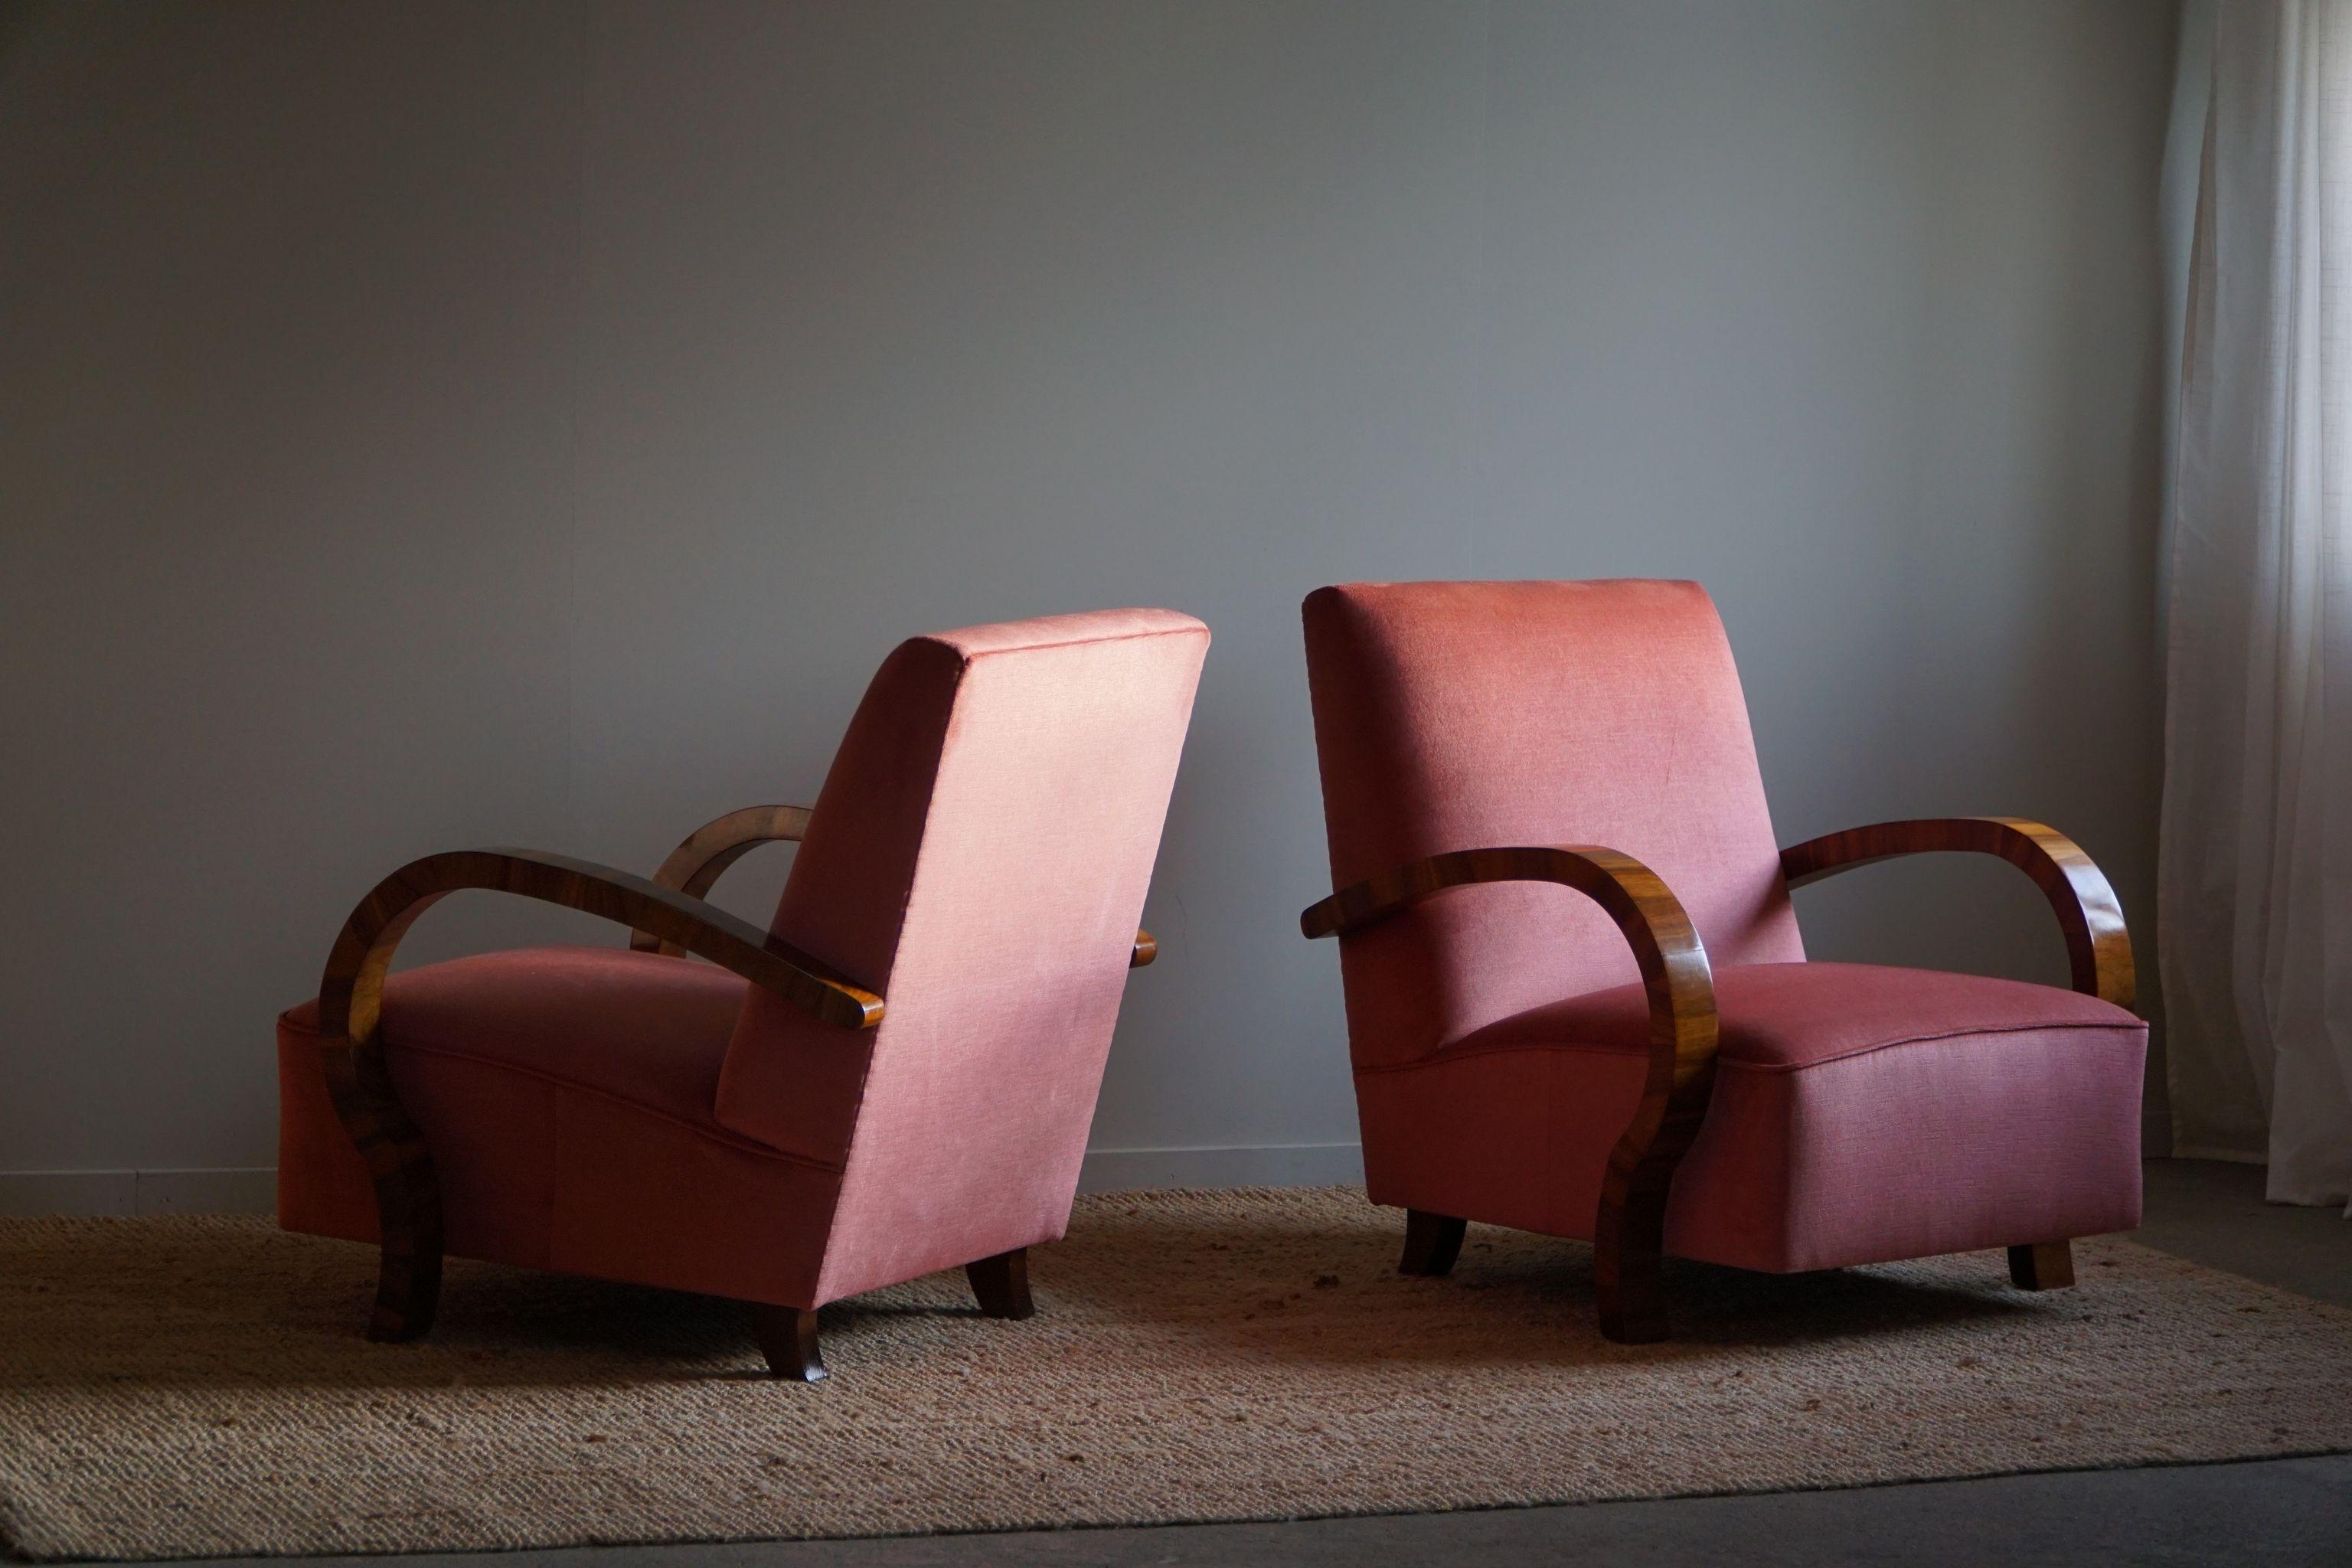 Such a beautiful and decadent pair of curved Art Deco lounge chairs, with armrest in walnut, made in the 1930s by a Danish cabinetmaker. Beautiful wood grains that complement these glamorous chairs. Reupholstered in great quality pink velvet.

This